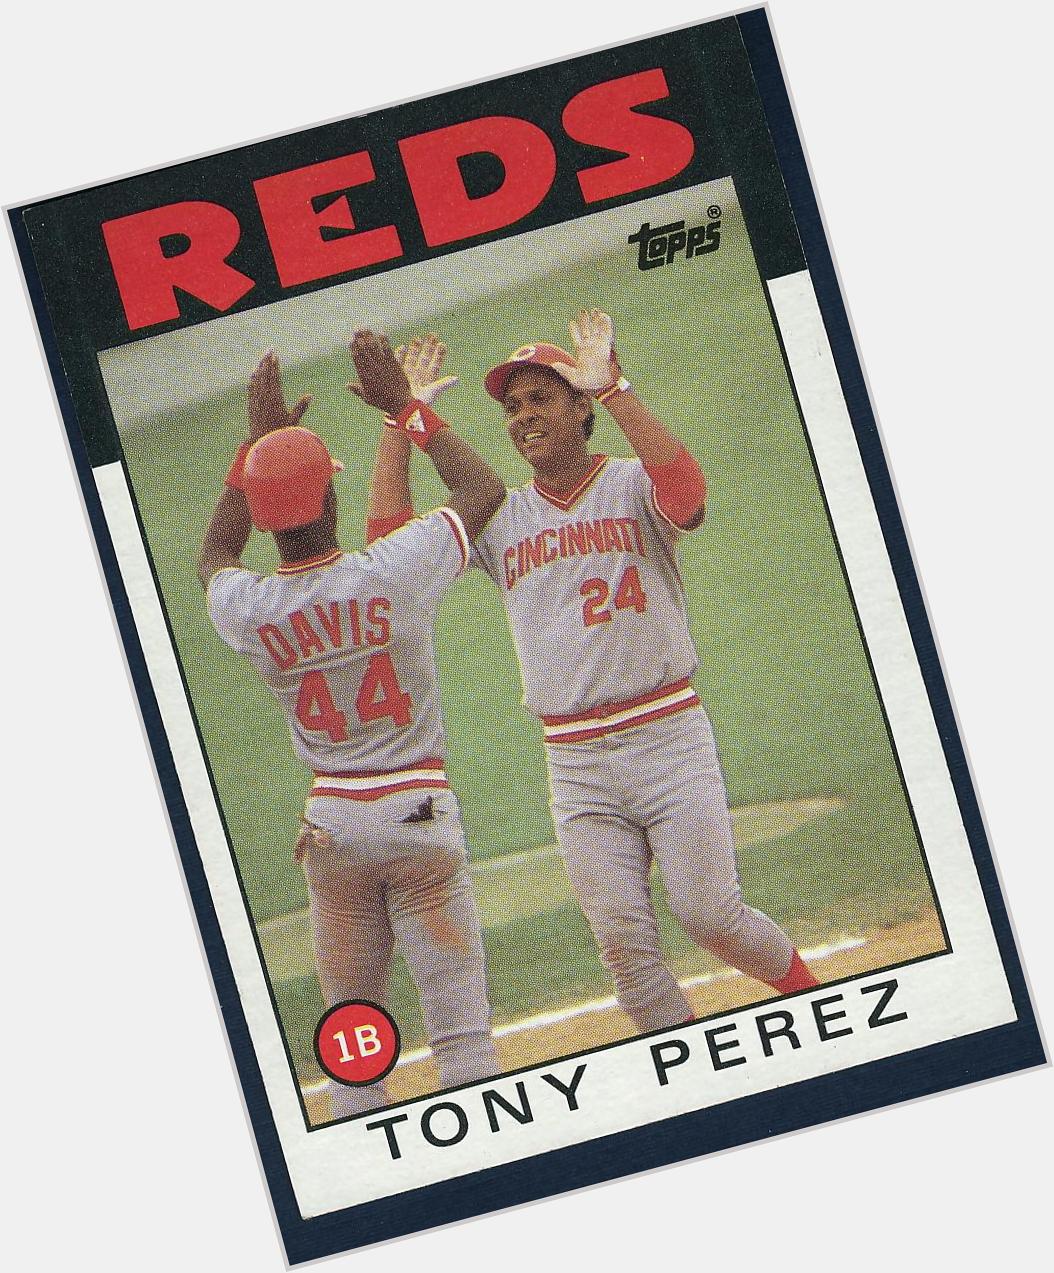 Happy Birthday Tony Perez! Your \86 Topps Card was one of our favorites. Action shots > awkward poses. 